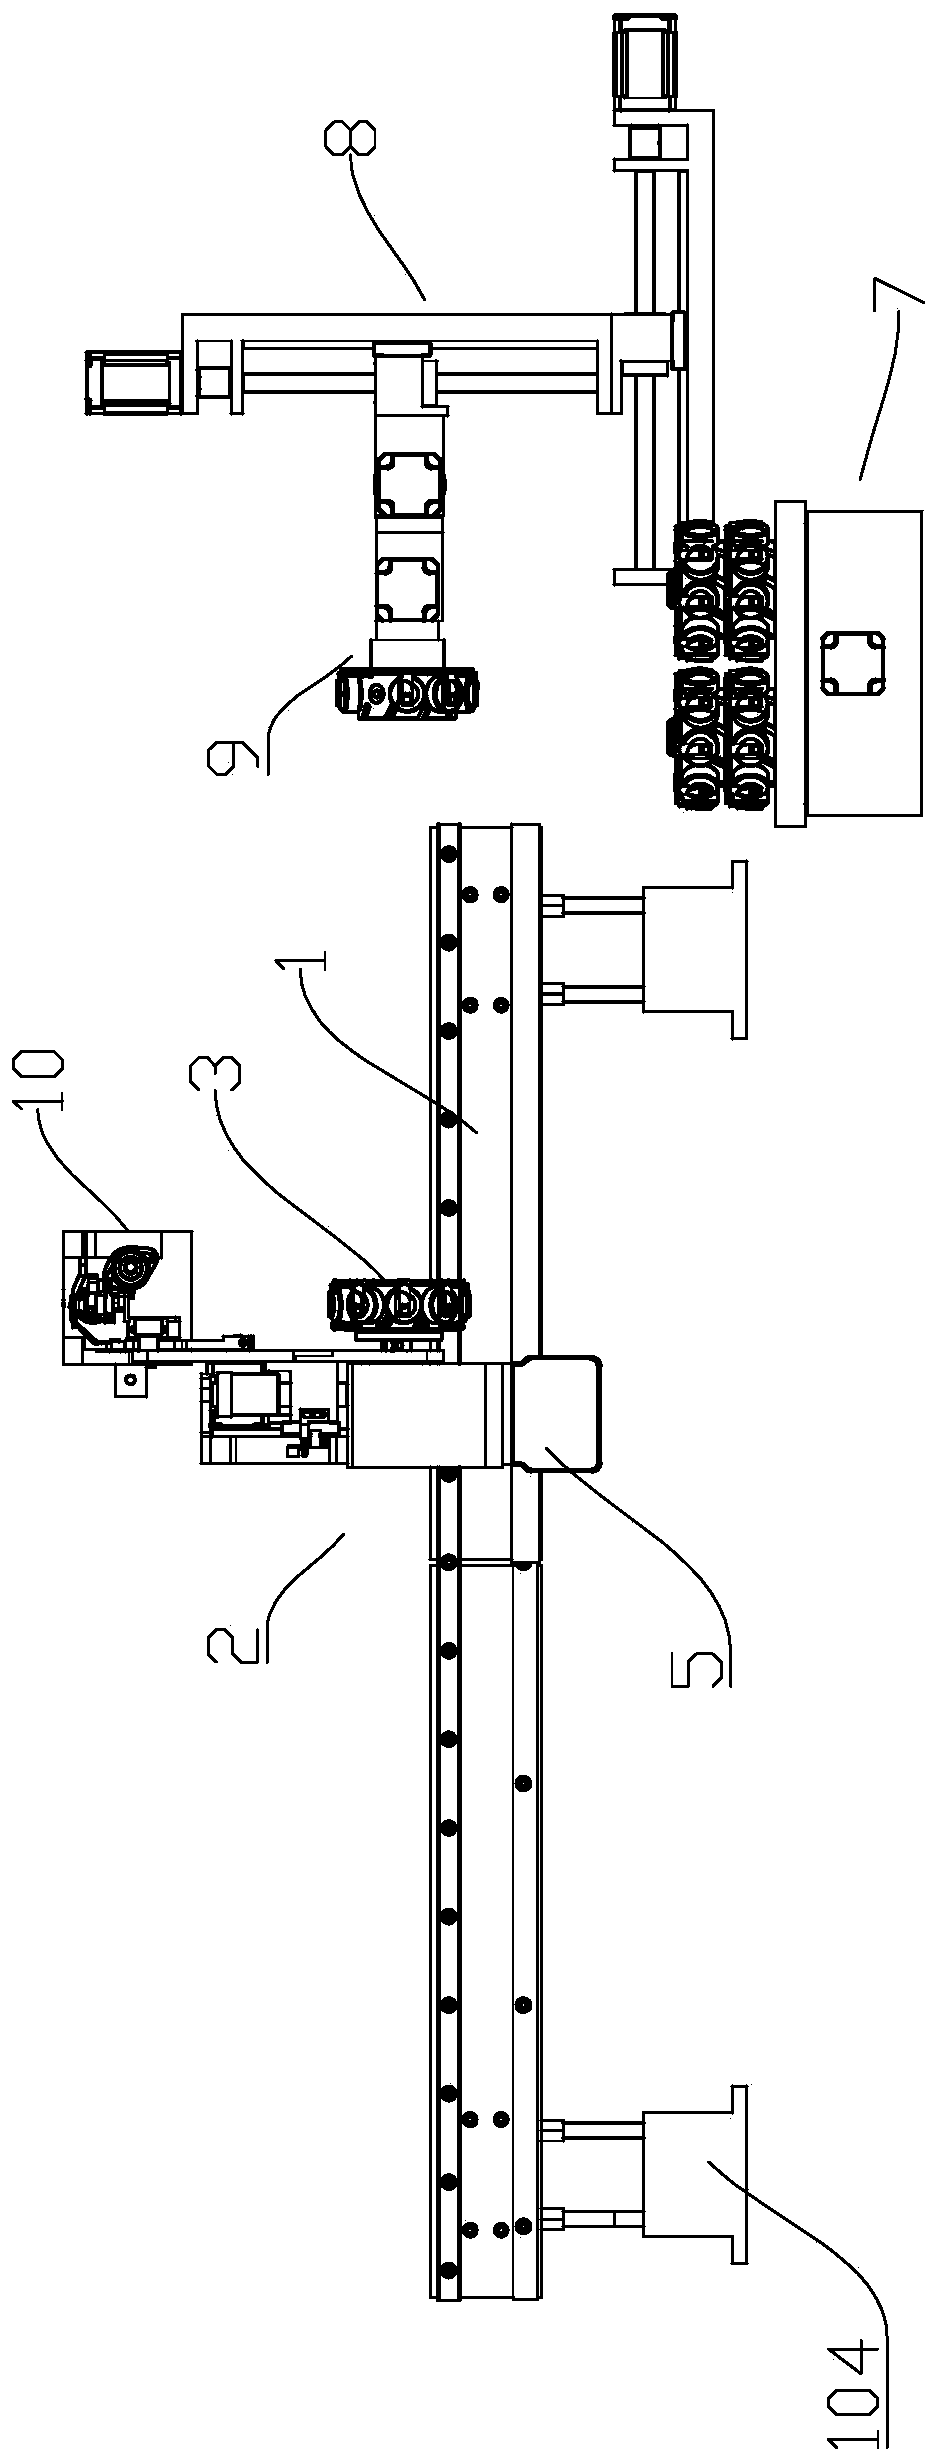 Full-automatic-feeding multi-station embroidery machine bottom thread changing system and method